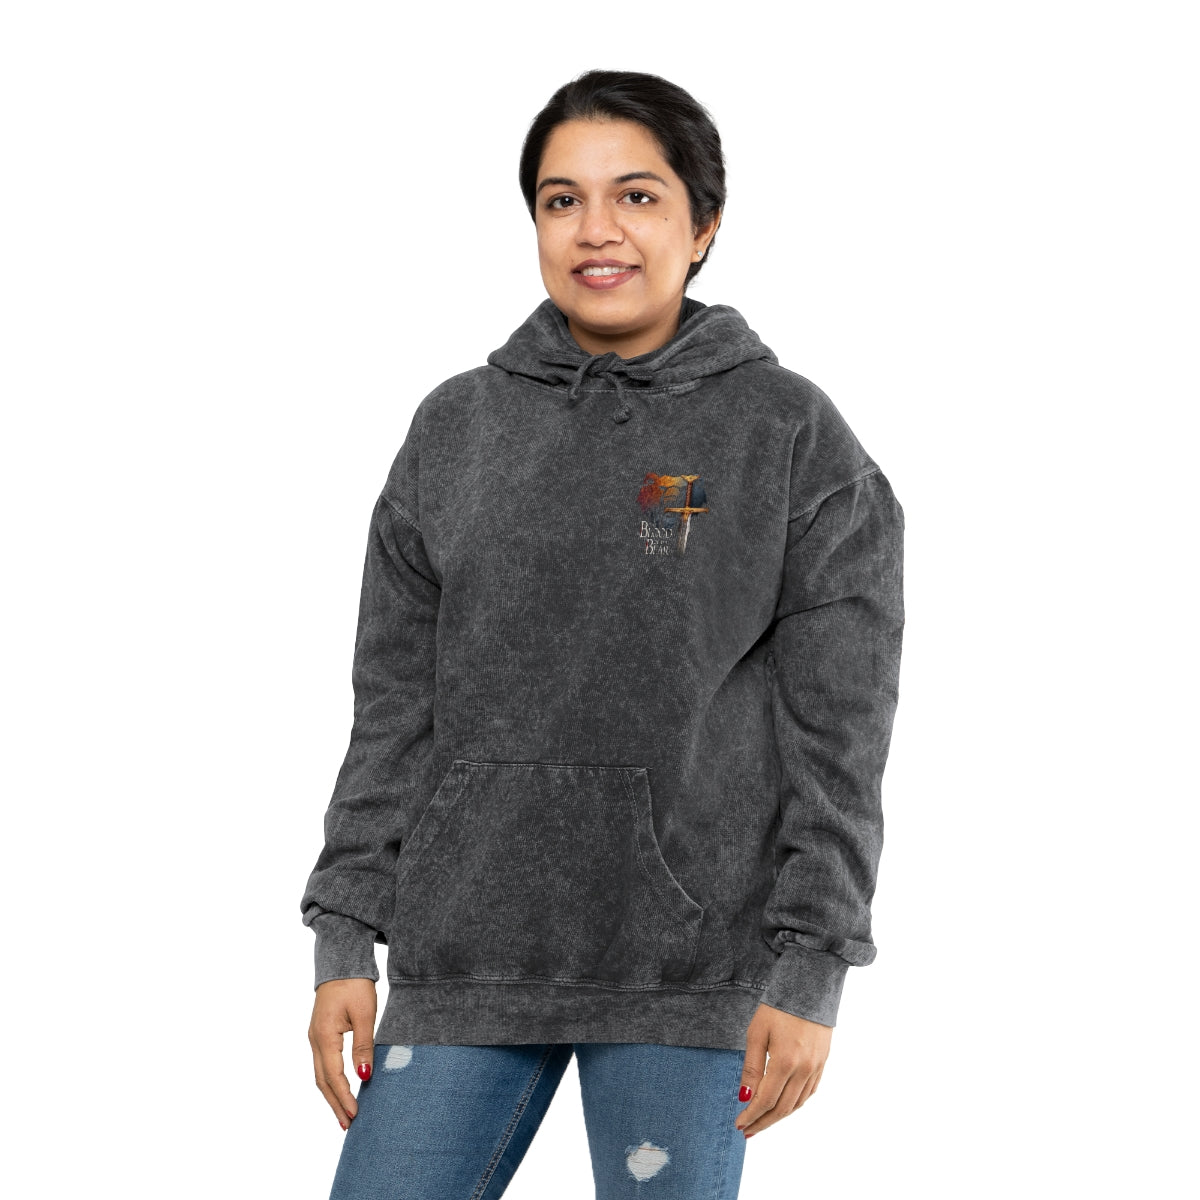 Bear Excalibur - Unisex Mineral Wash Hoodie - Small Print